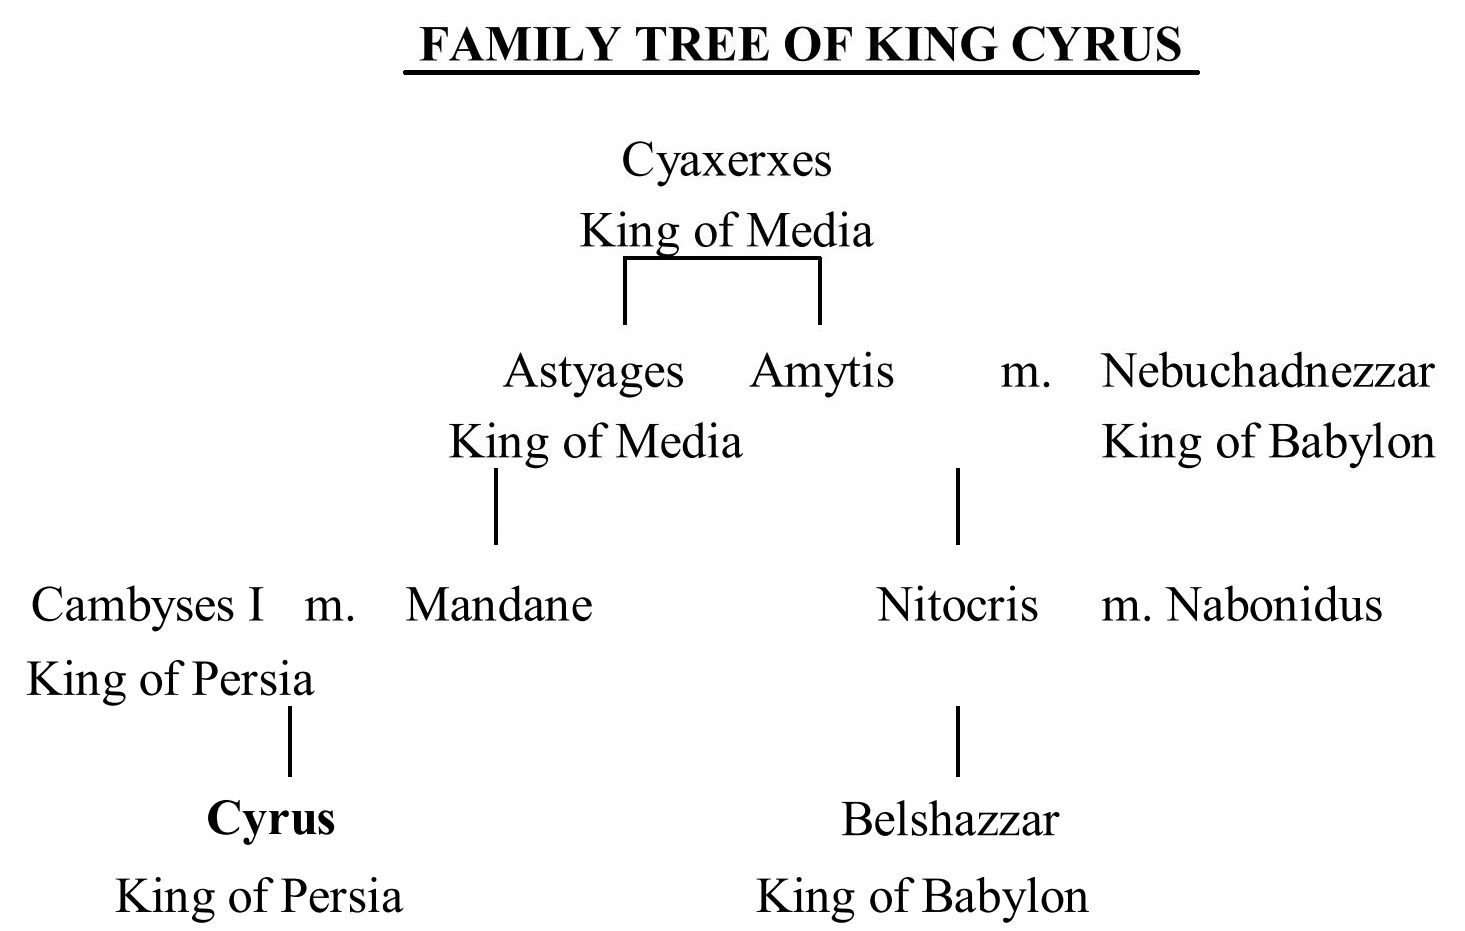 Family tree of King Cyrus